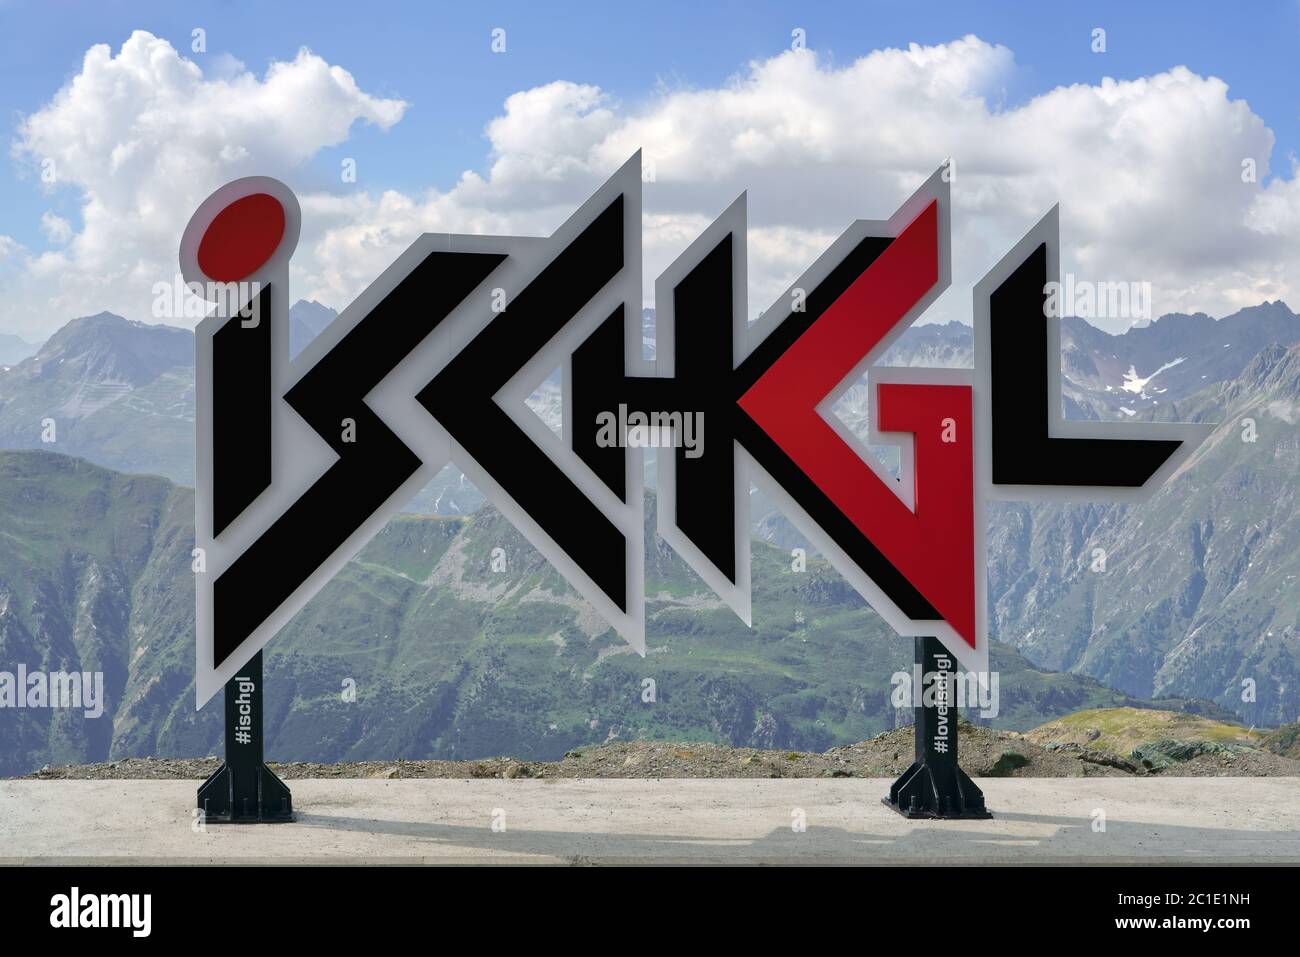 Ischgl logo stock photography and - Alamy